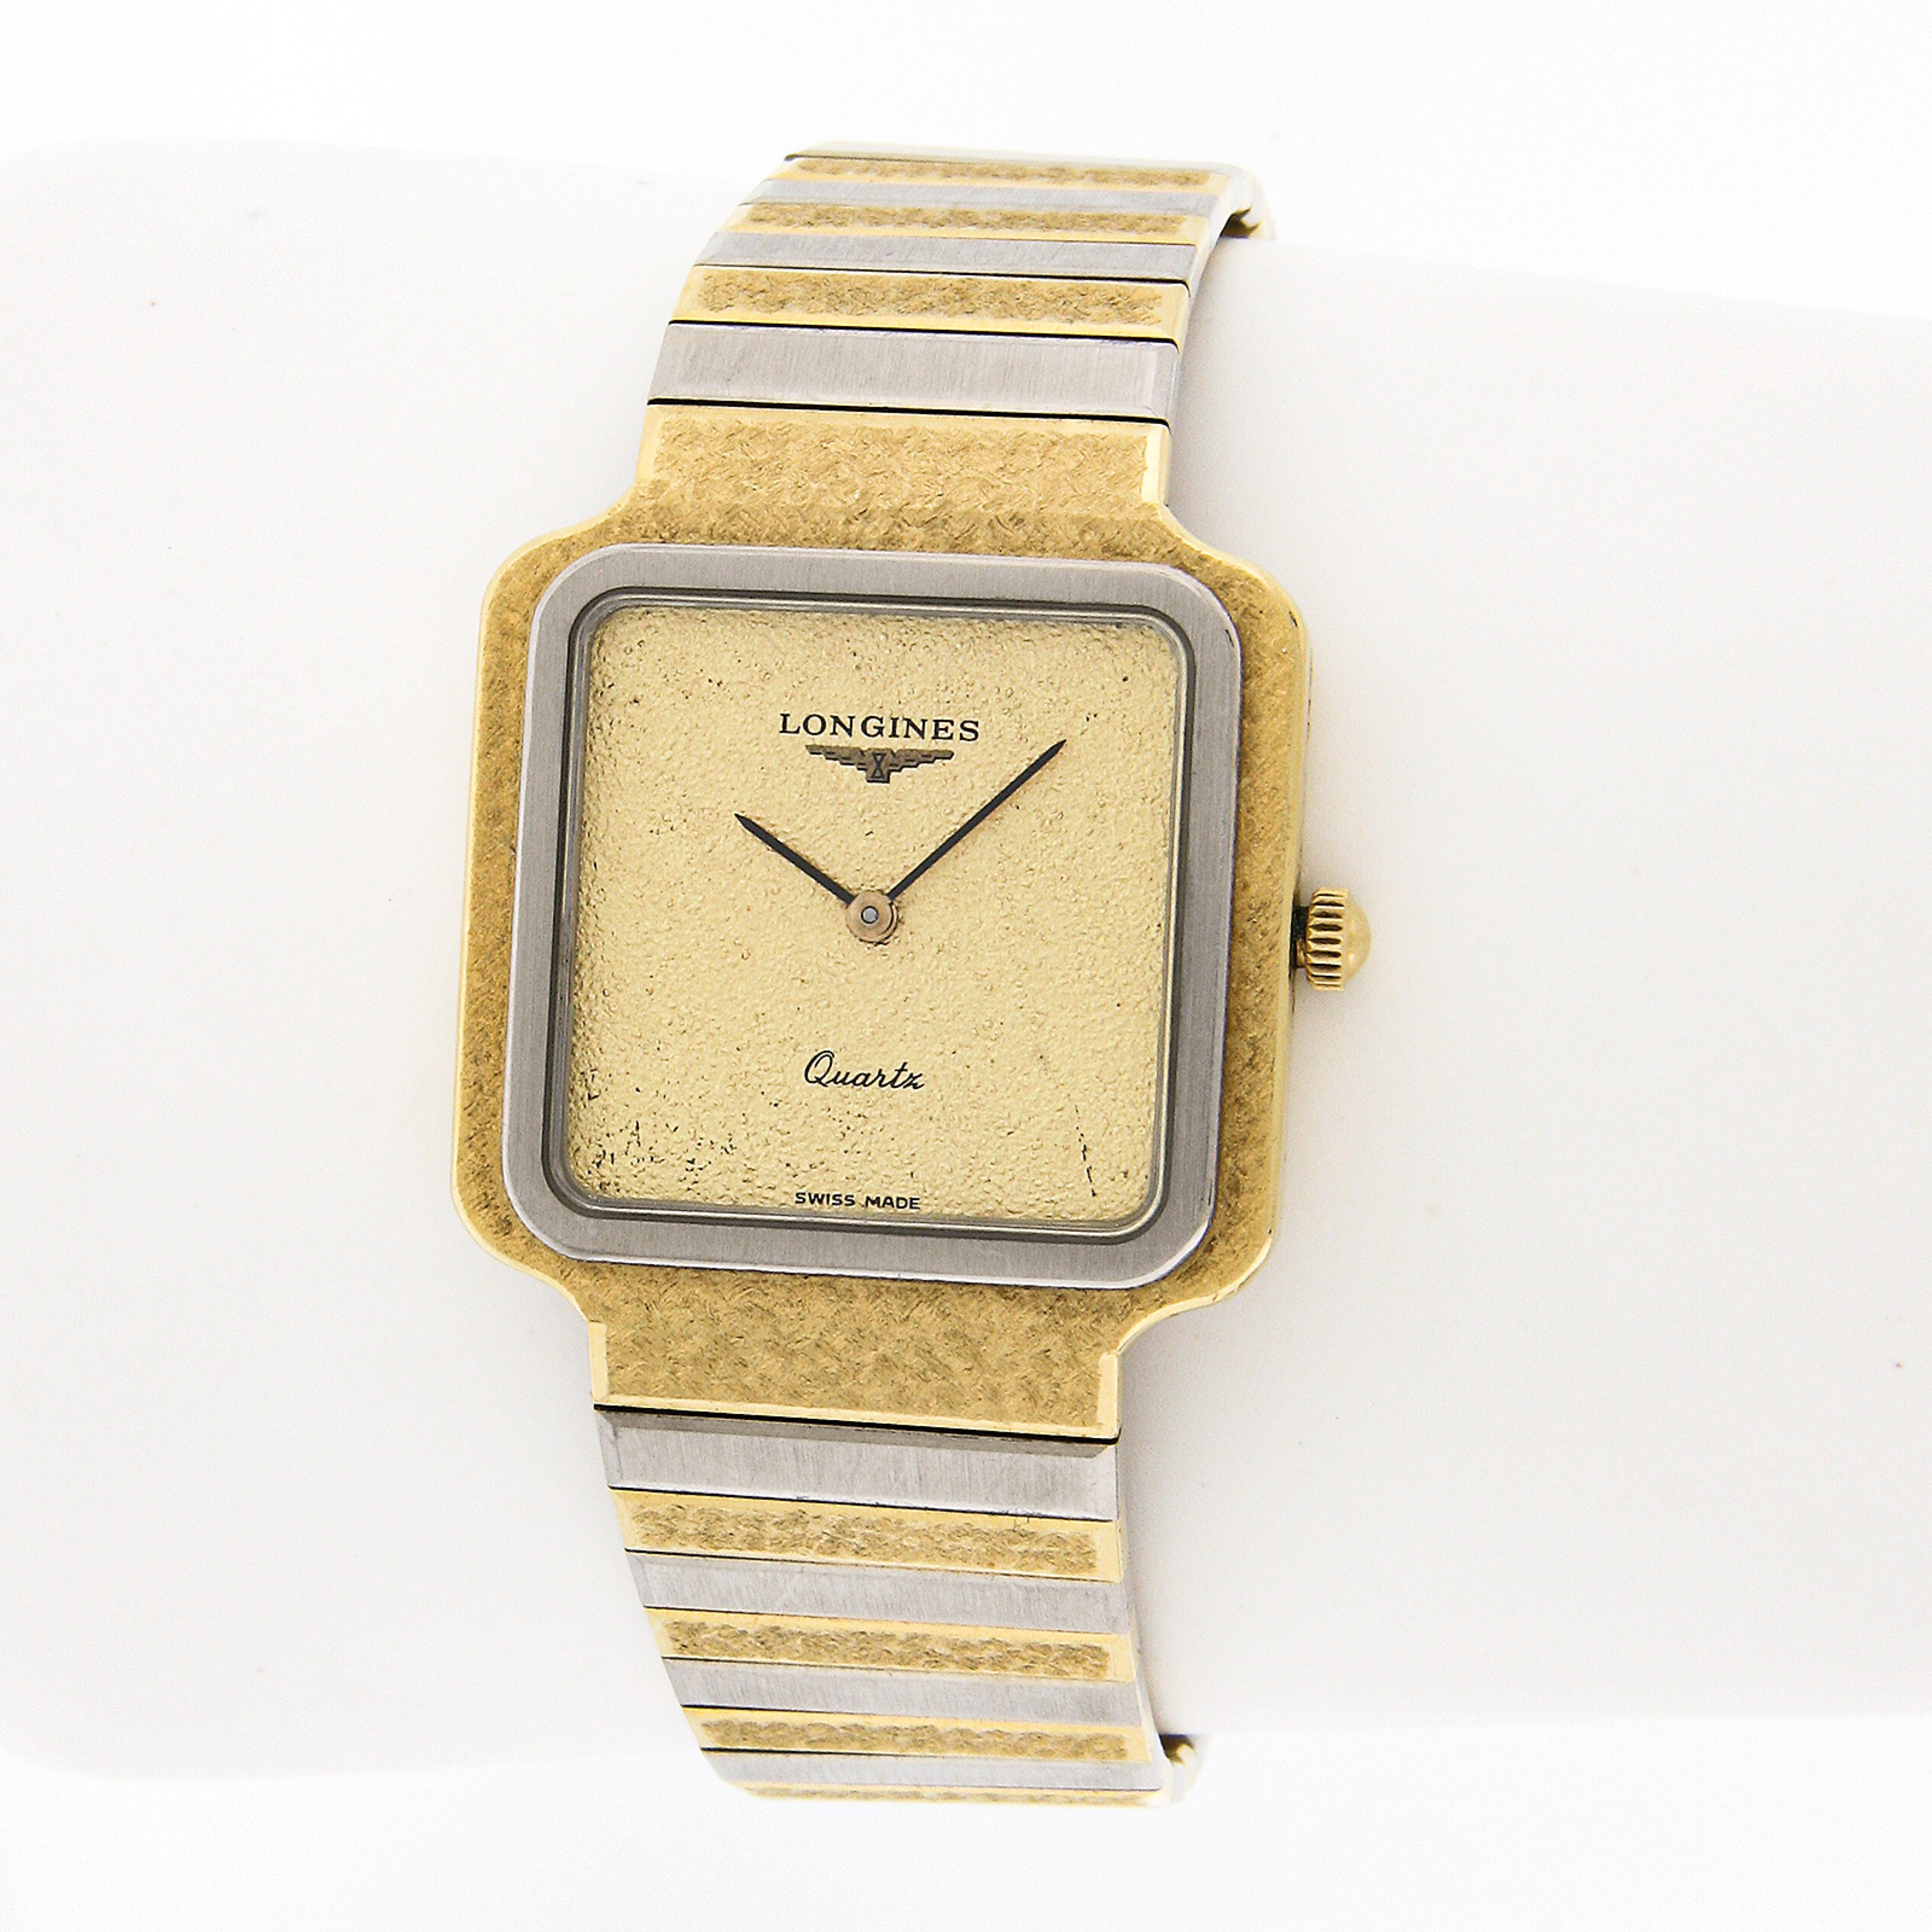 This elegant and luxurious vintage Longines wrist watch features a 28mm wide solid 18k gold square shaped case. The case features unique hammered finish with a plain and smooth white gold bezel. Similarly the original bracelet also features hammered